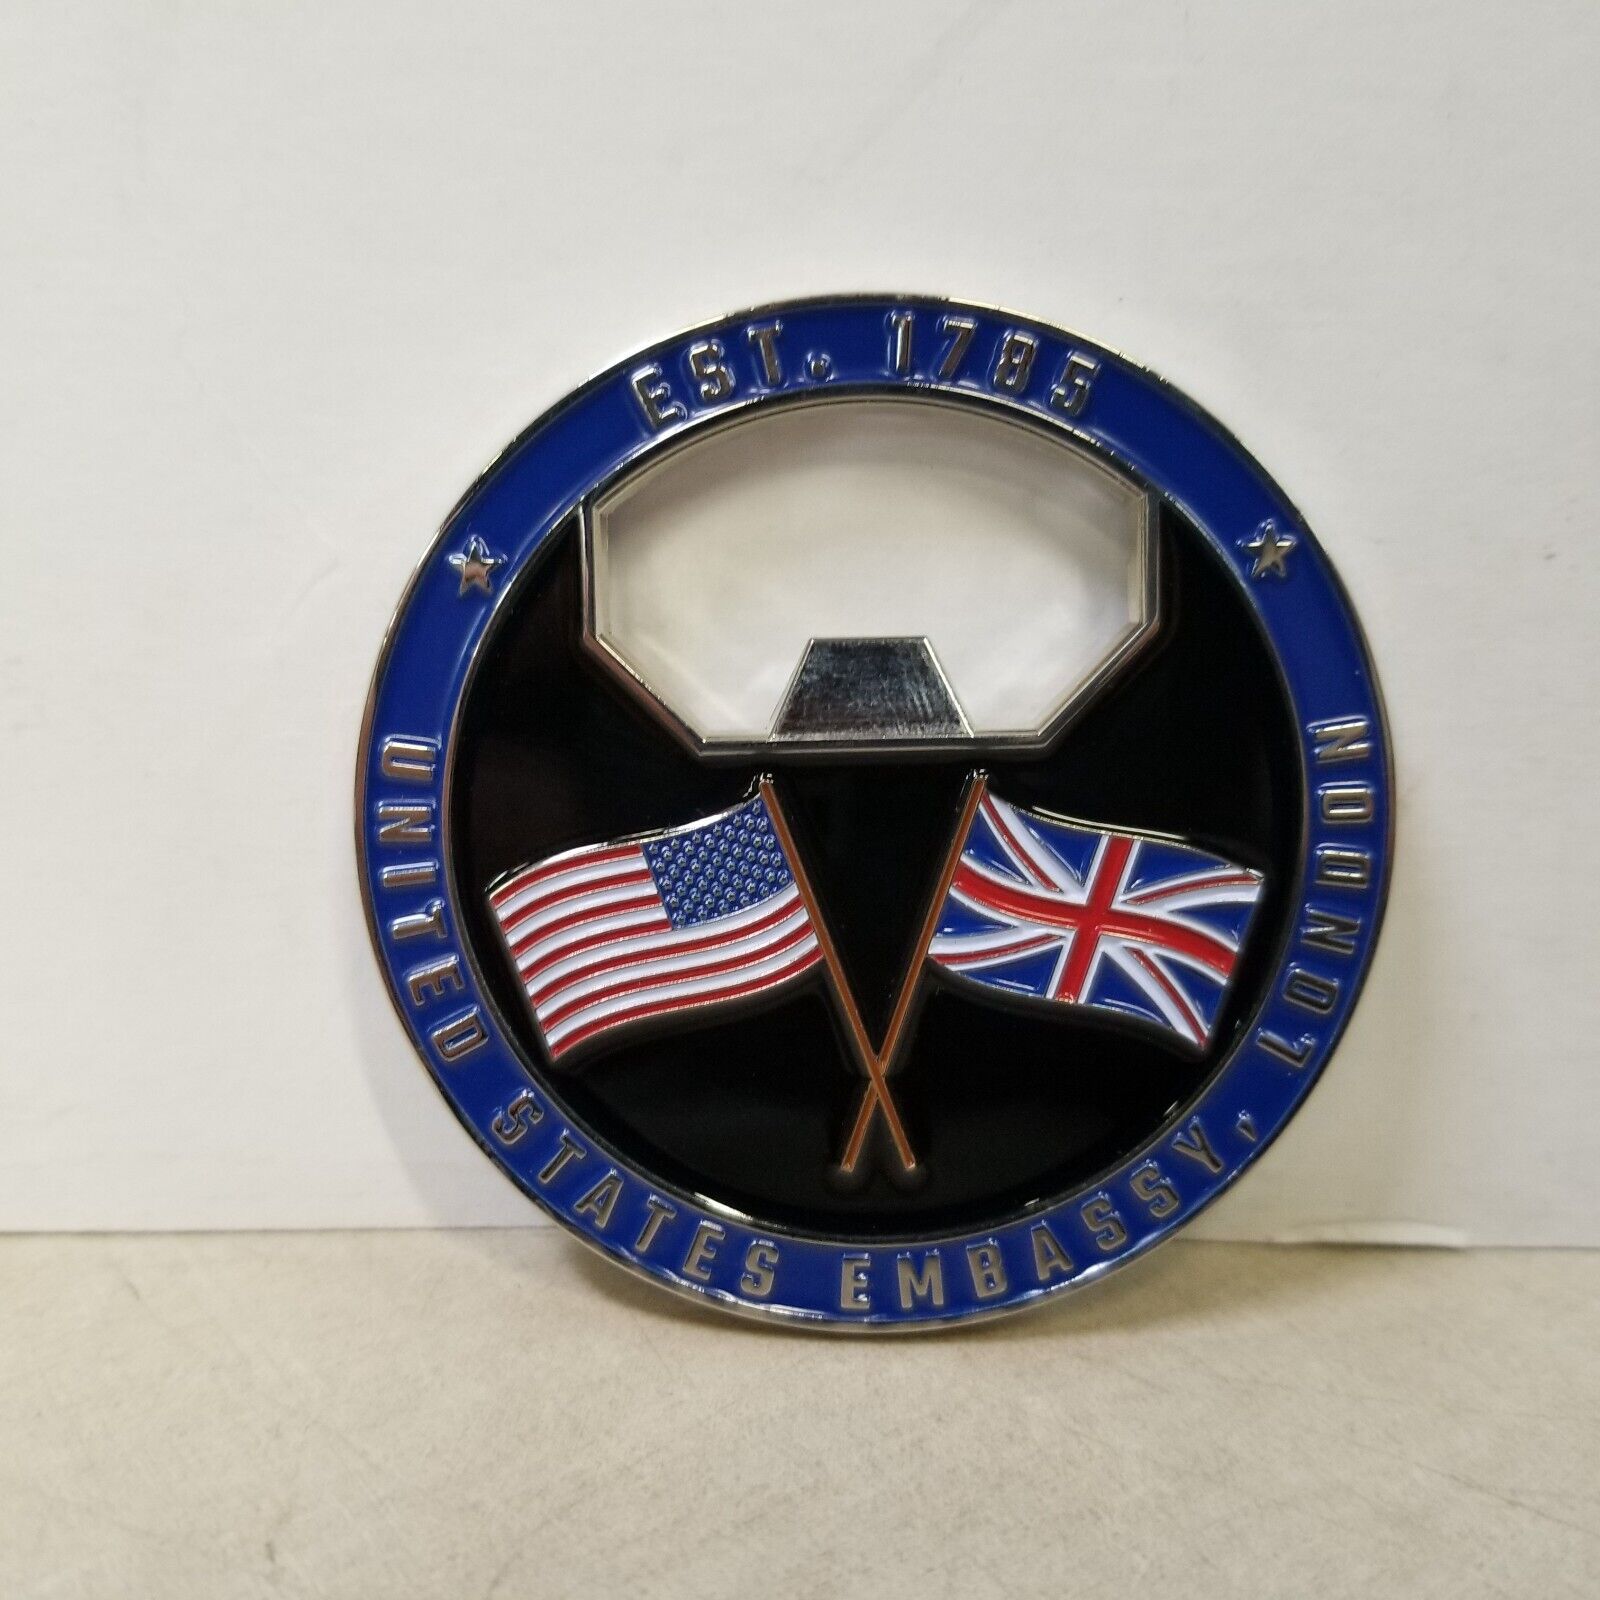 U.S Department Of Defense EST 1785 United States Embassy London Challenge Coin 